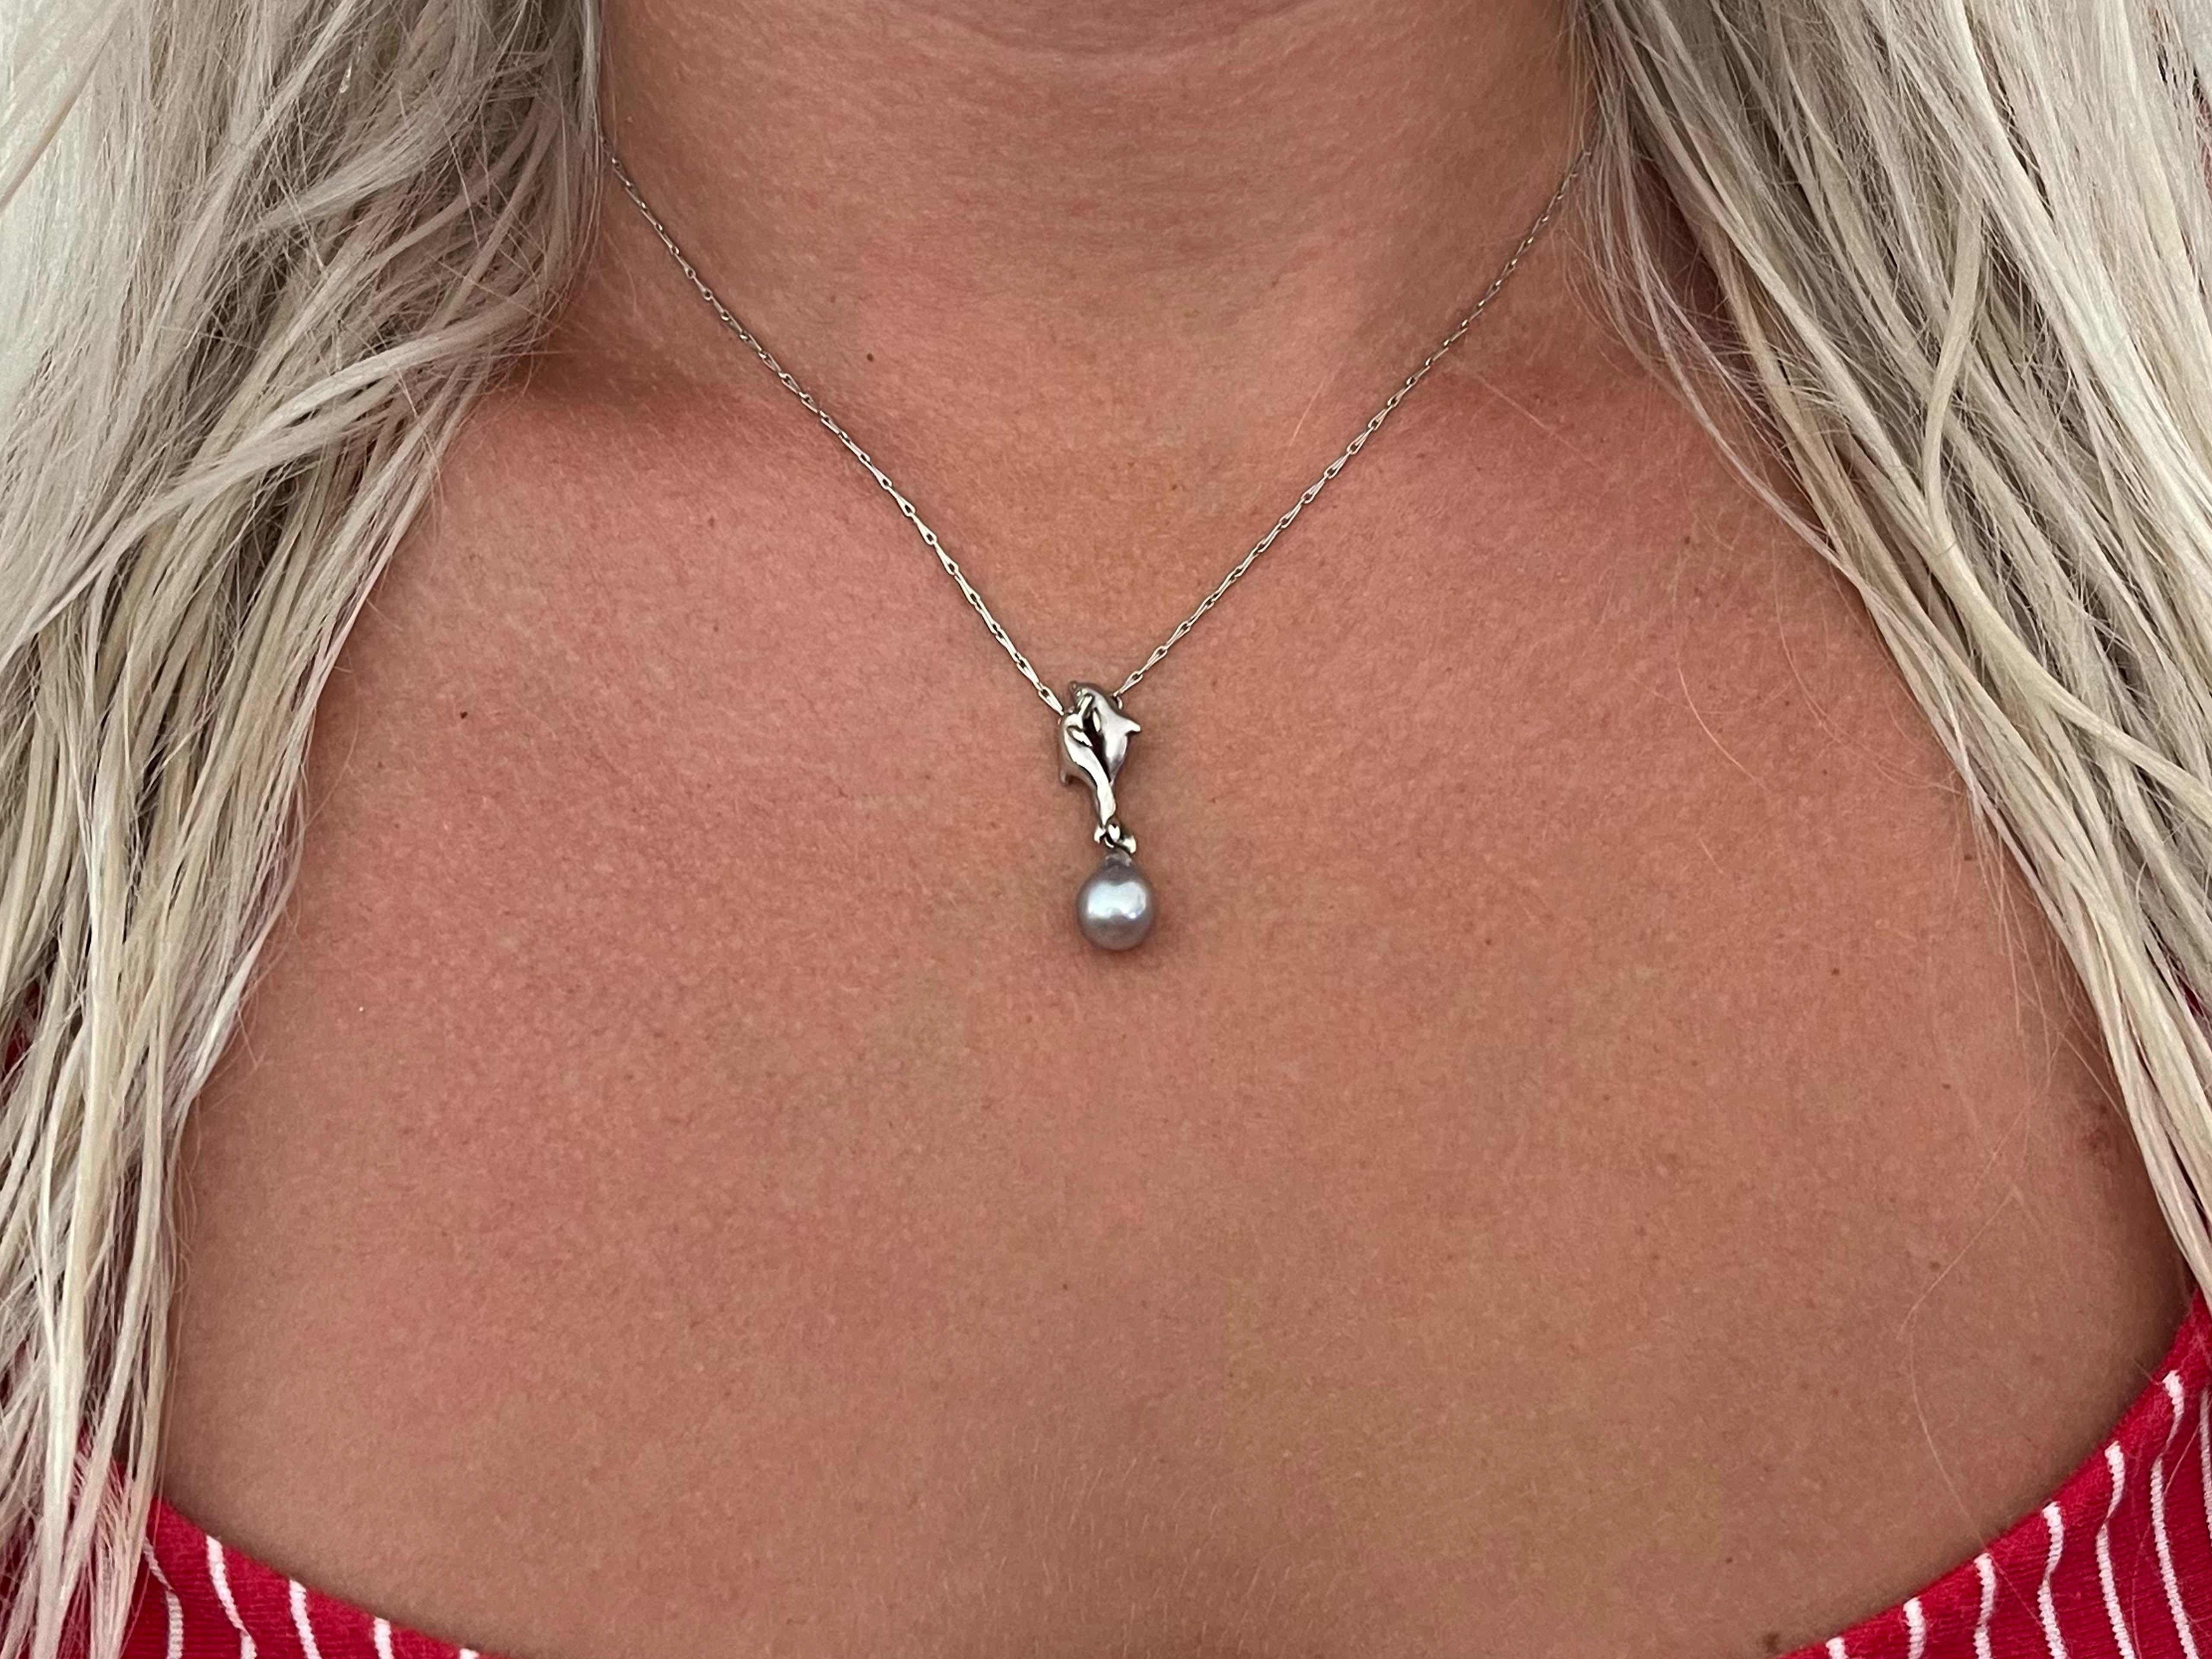 This pendant features two intertwined dolphins with a cultured silver pearl attached at the tail. The pearl measures 8 mm in diameter and the pendant drops 31 mm from the 16